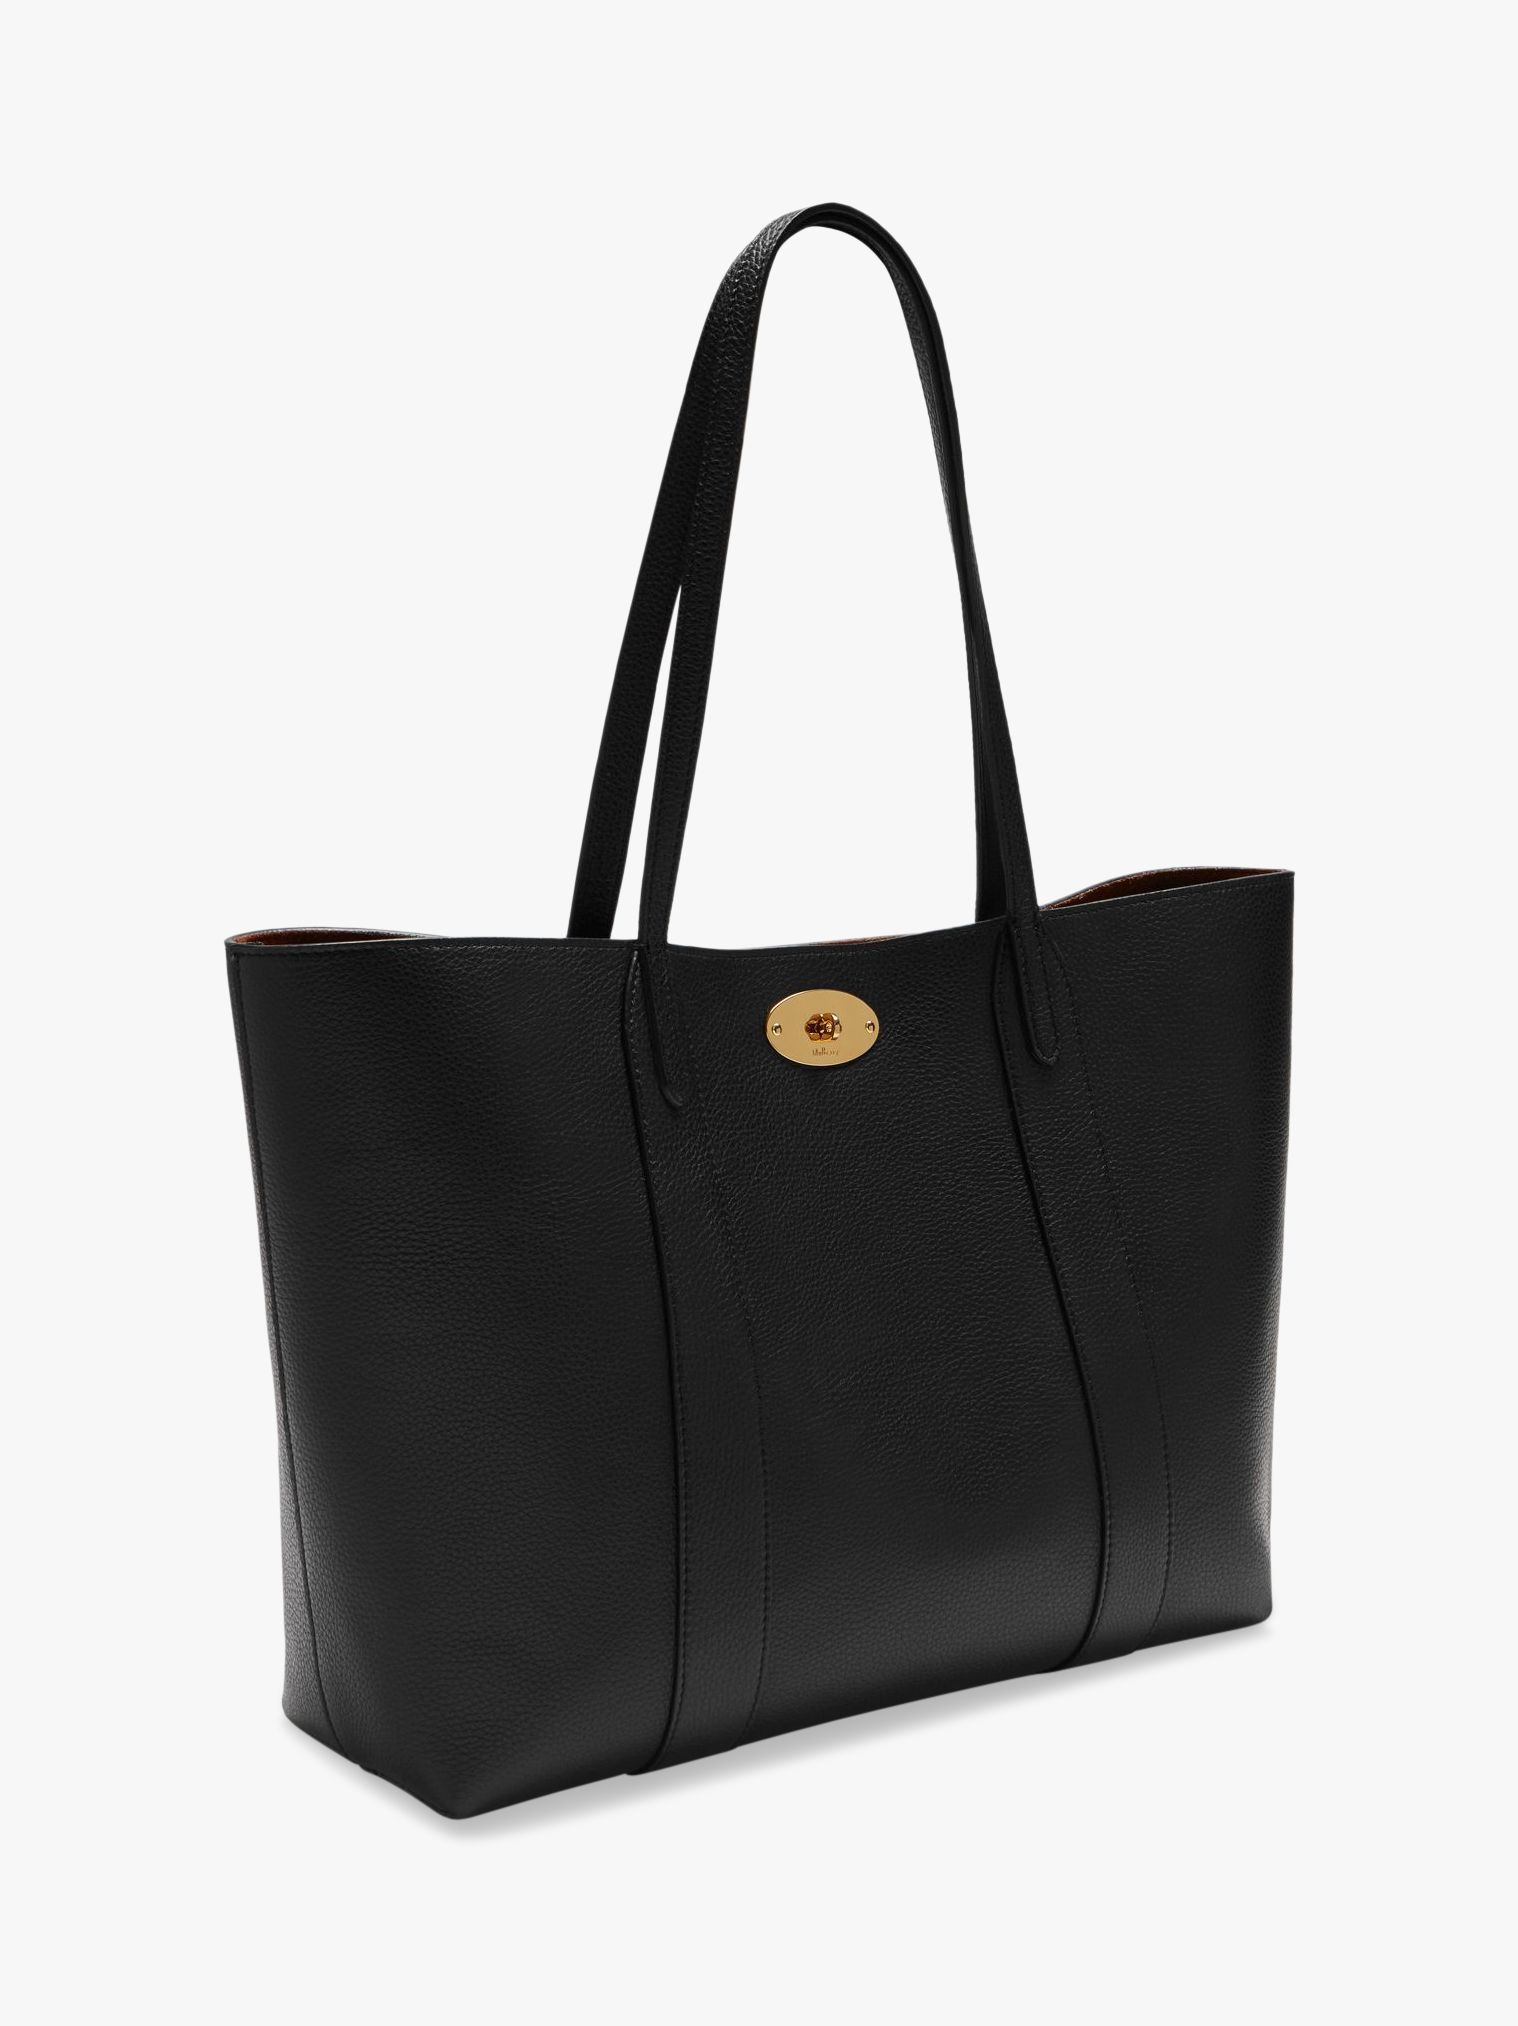 Mulberry Bayswater Small Classic Grain Leather Tote Bag, Black at John ...